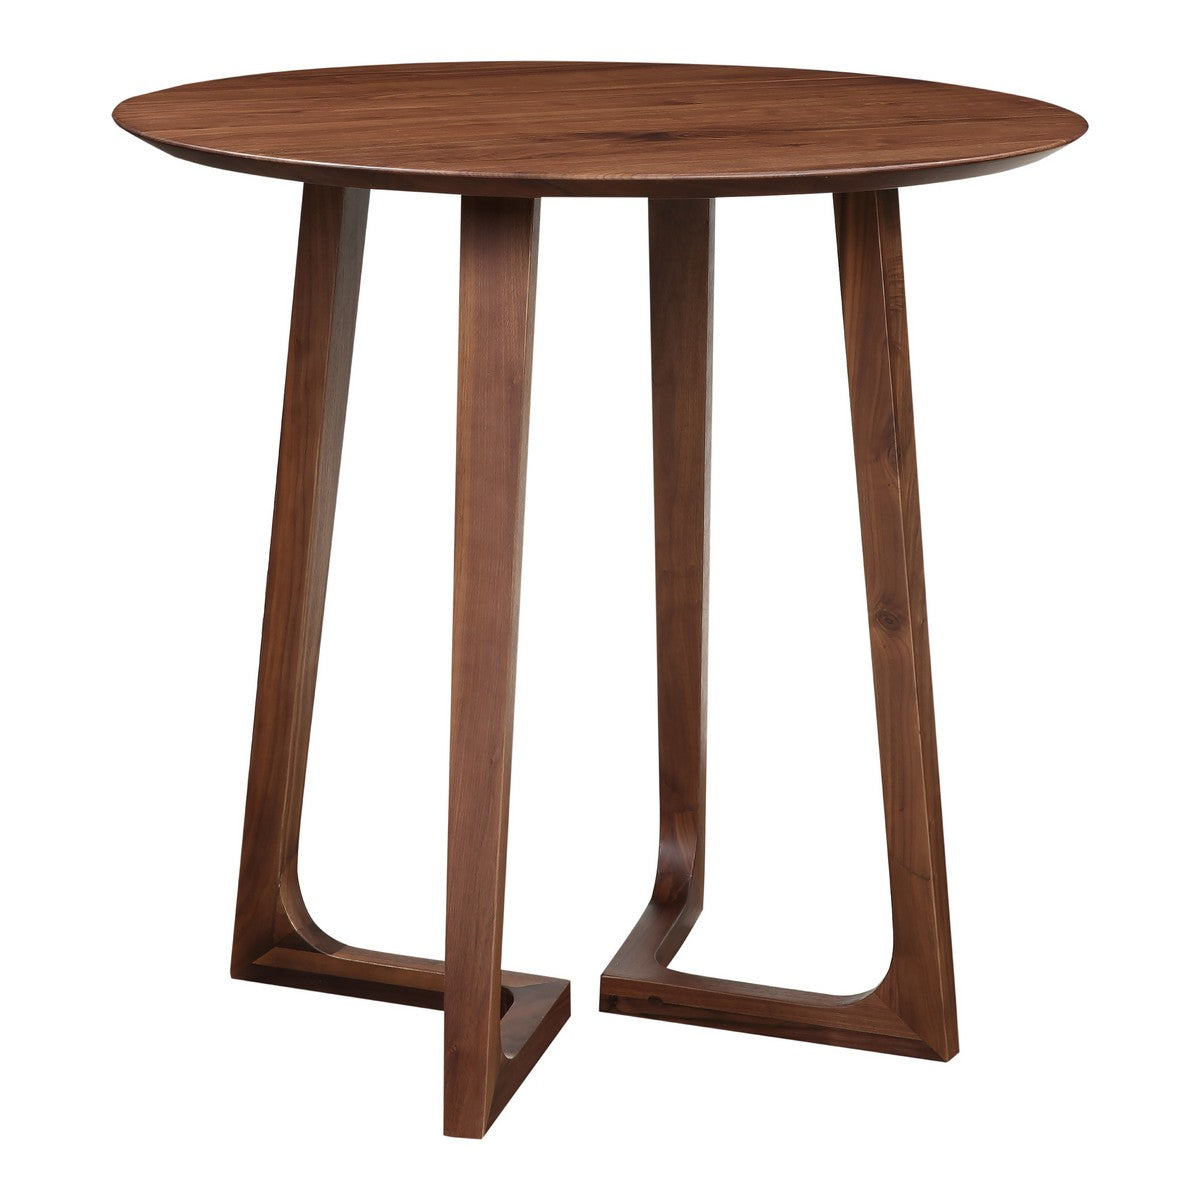 Moe's Home Collection Godenza Bar Table Walnut - BC-1089-03